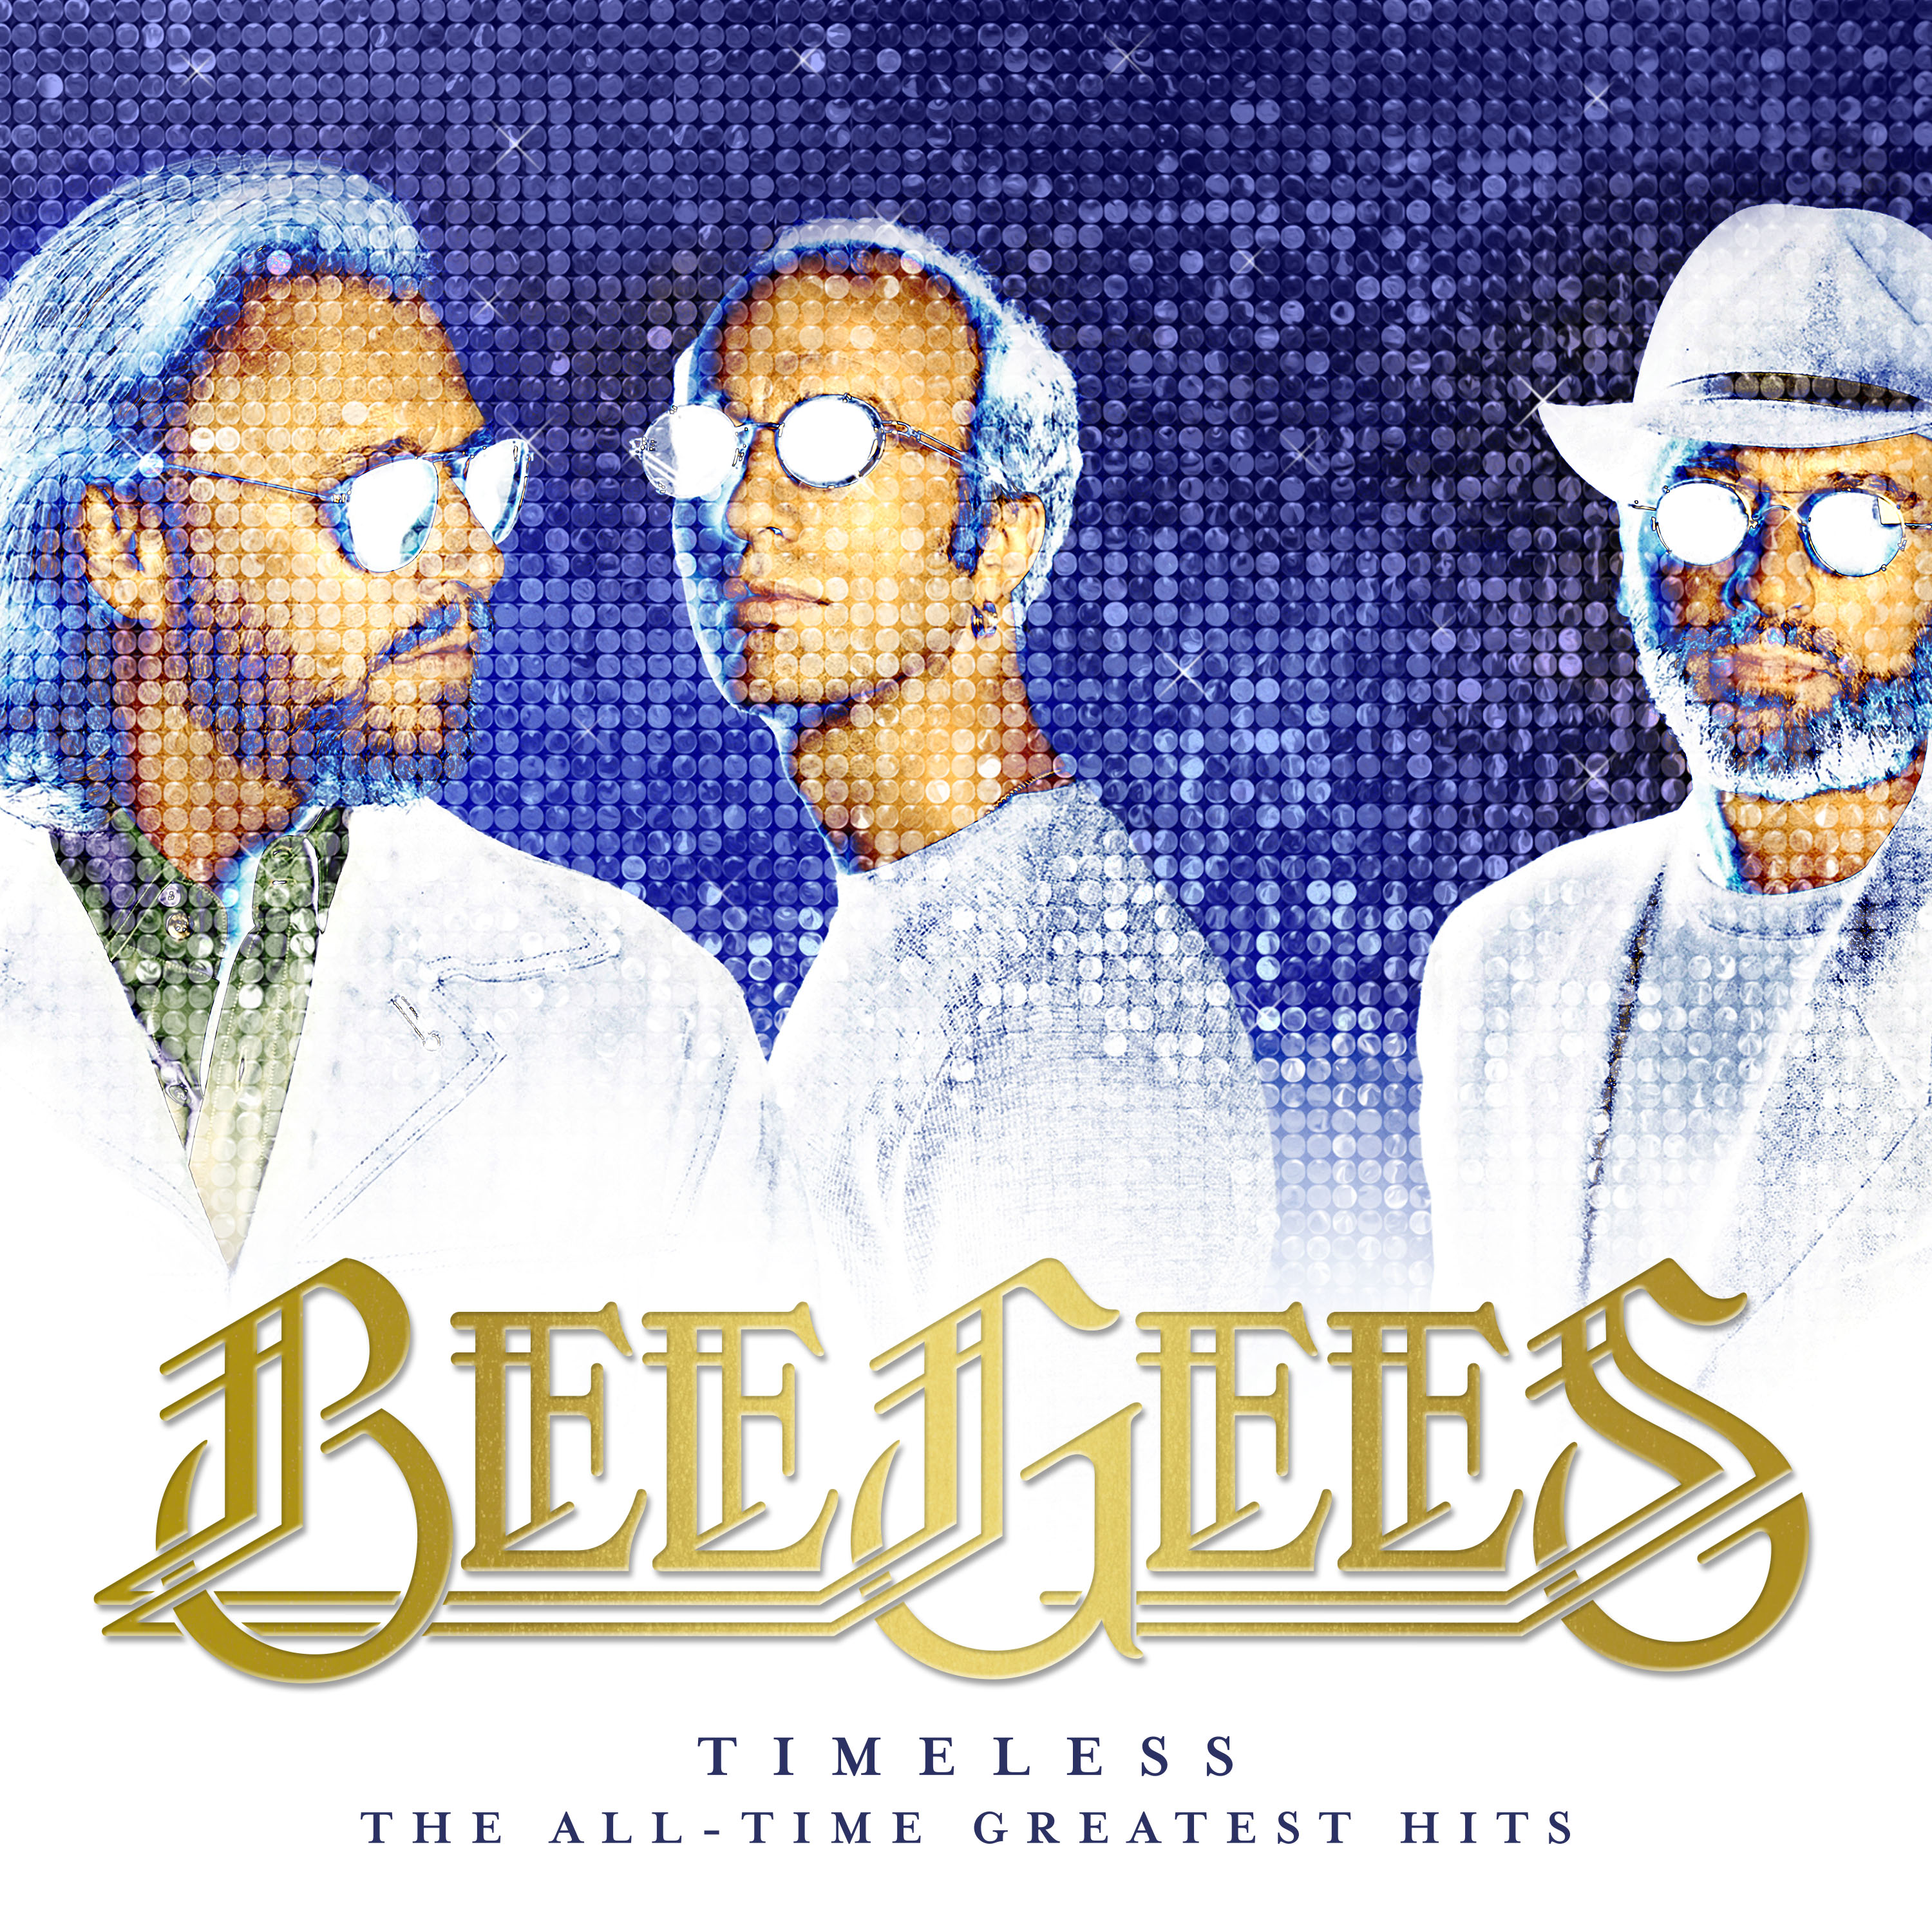 BEE GEES ‘TIMELESS: THE ALL-TIME GREATEST HITS’